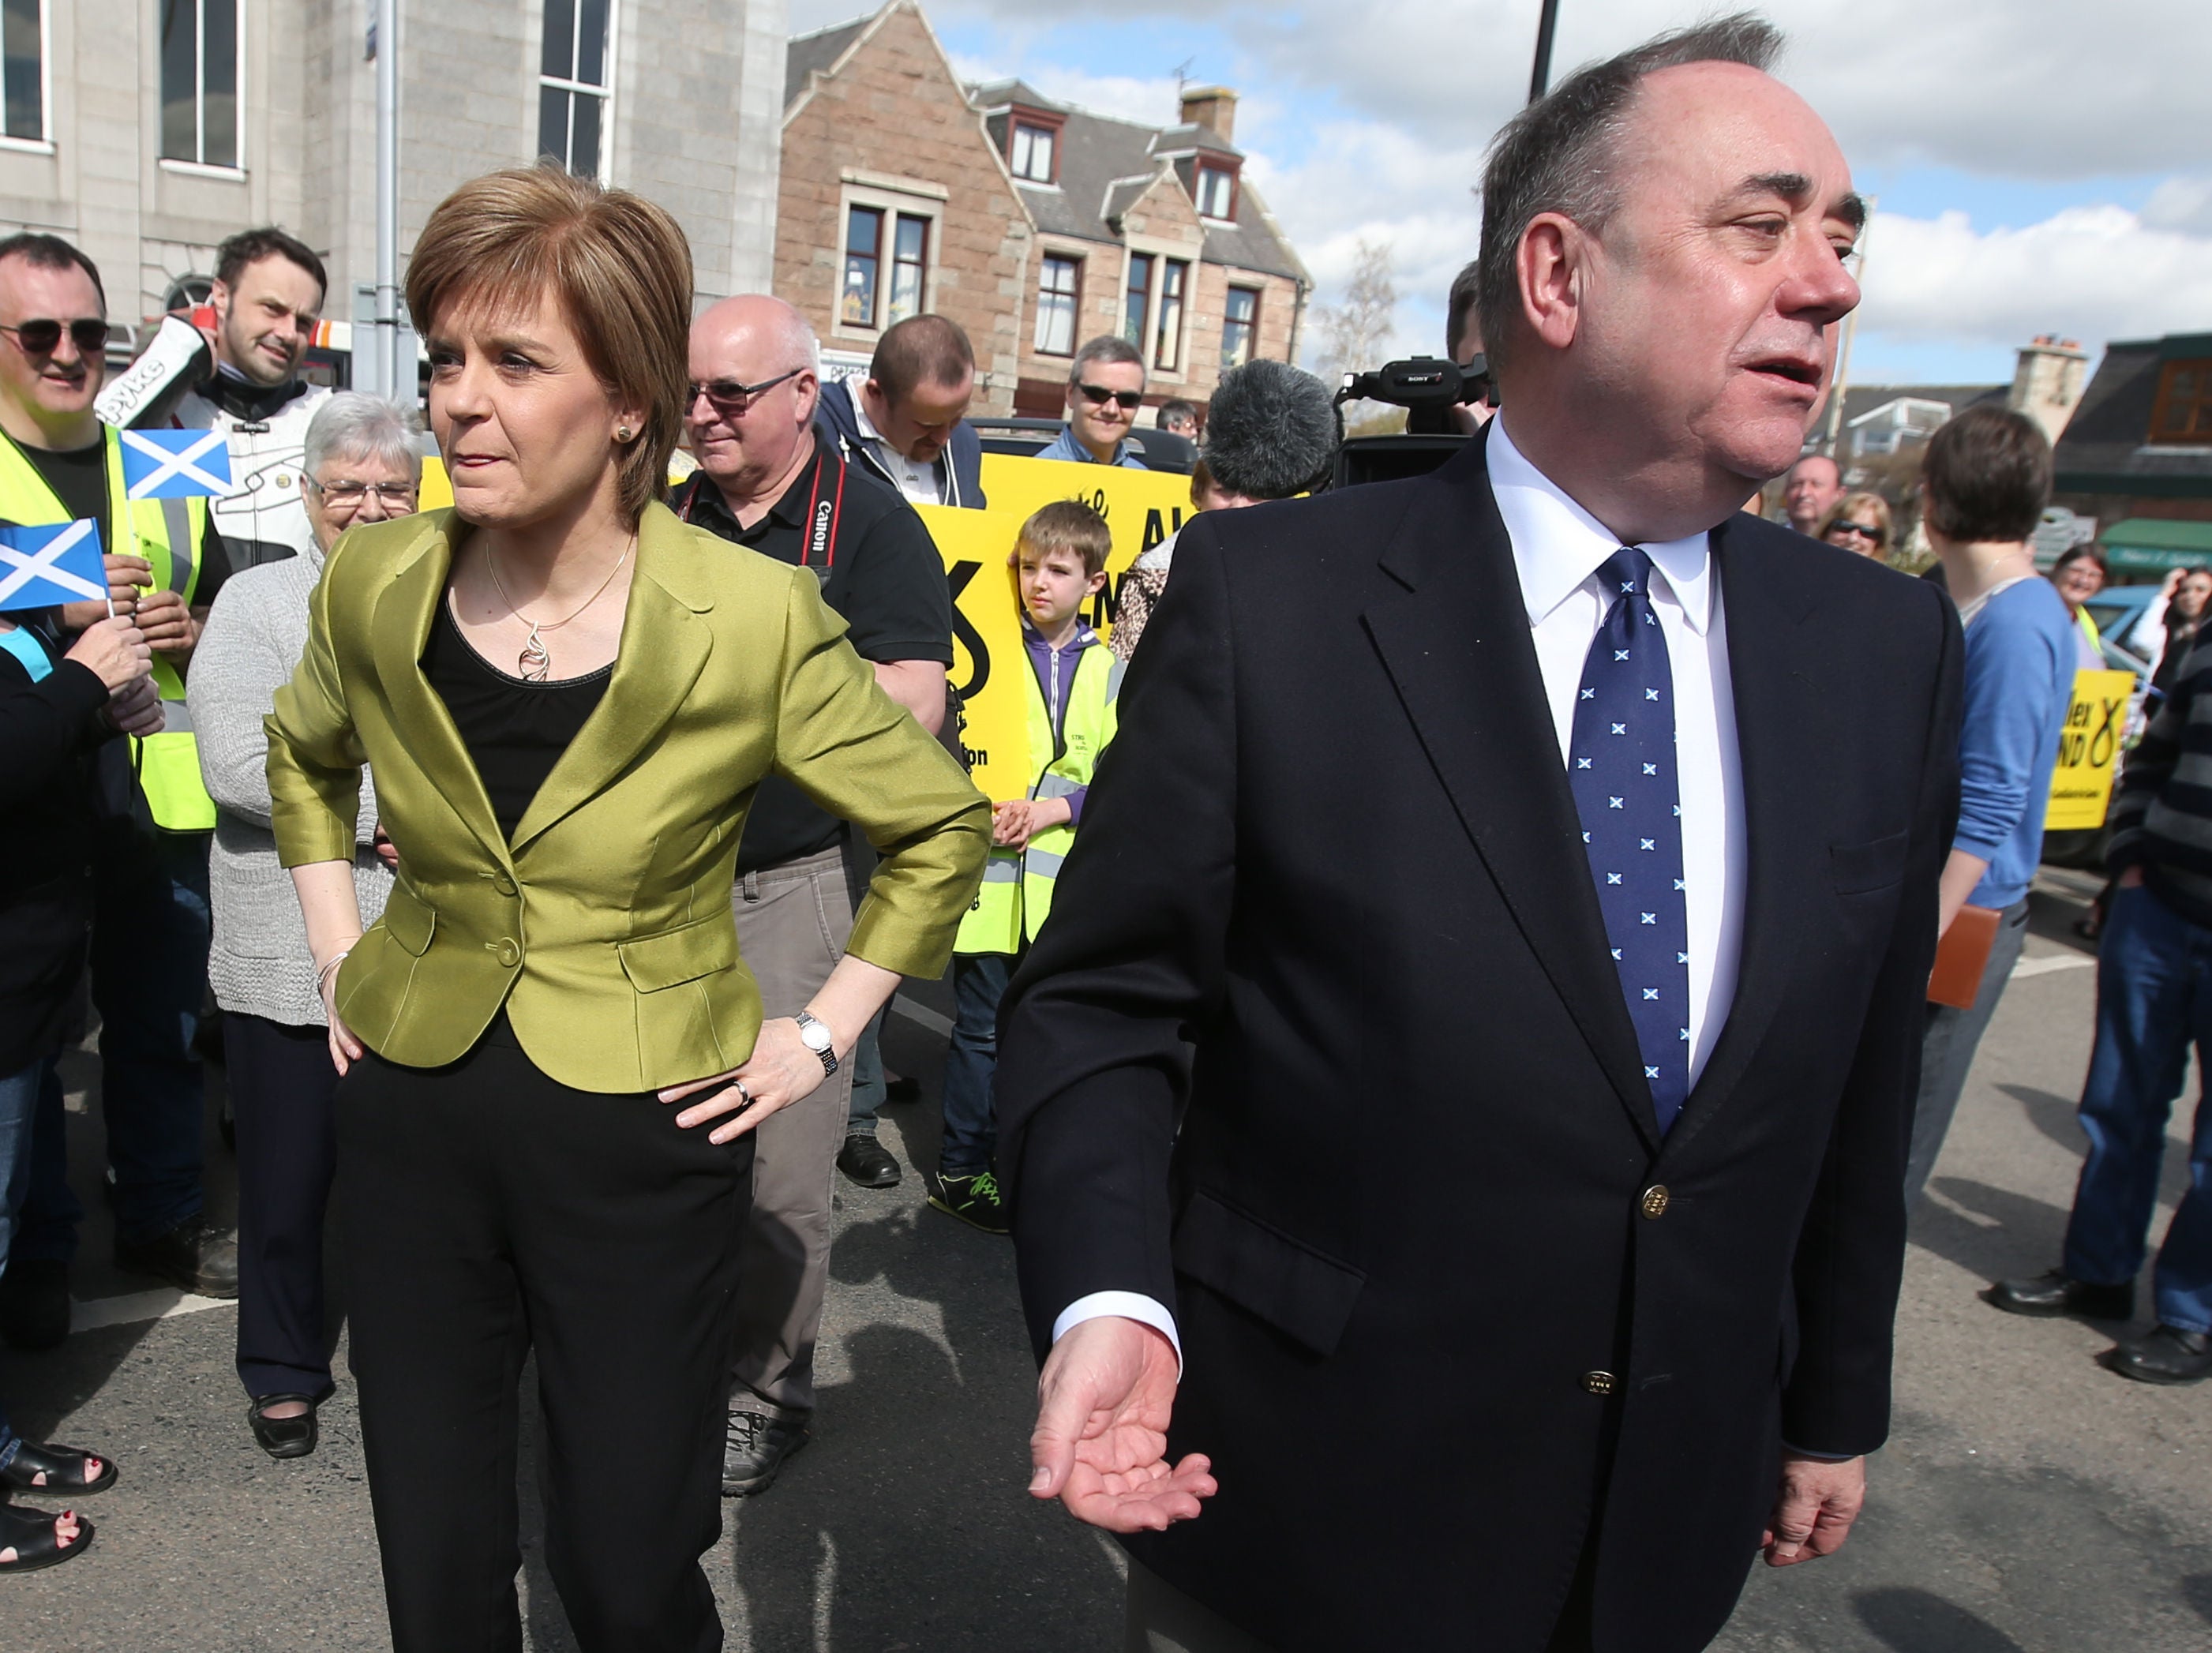 Alex Salmond and Nicola Sturgeon worked together in the run up to the independence vote in 2014 – but since then the relationship between the pair has broken down. (Andrew Milligan/PA)